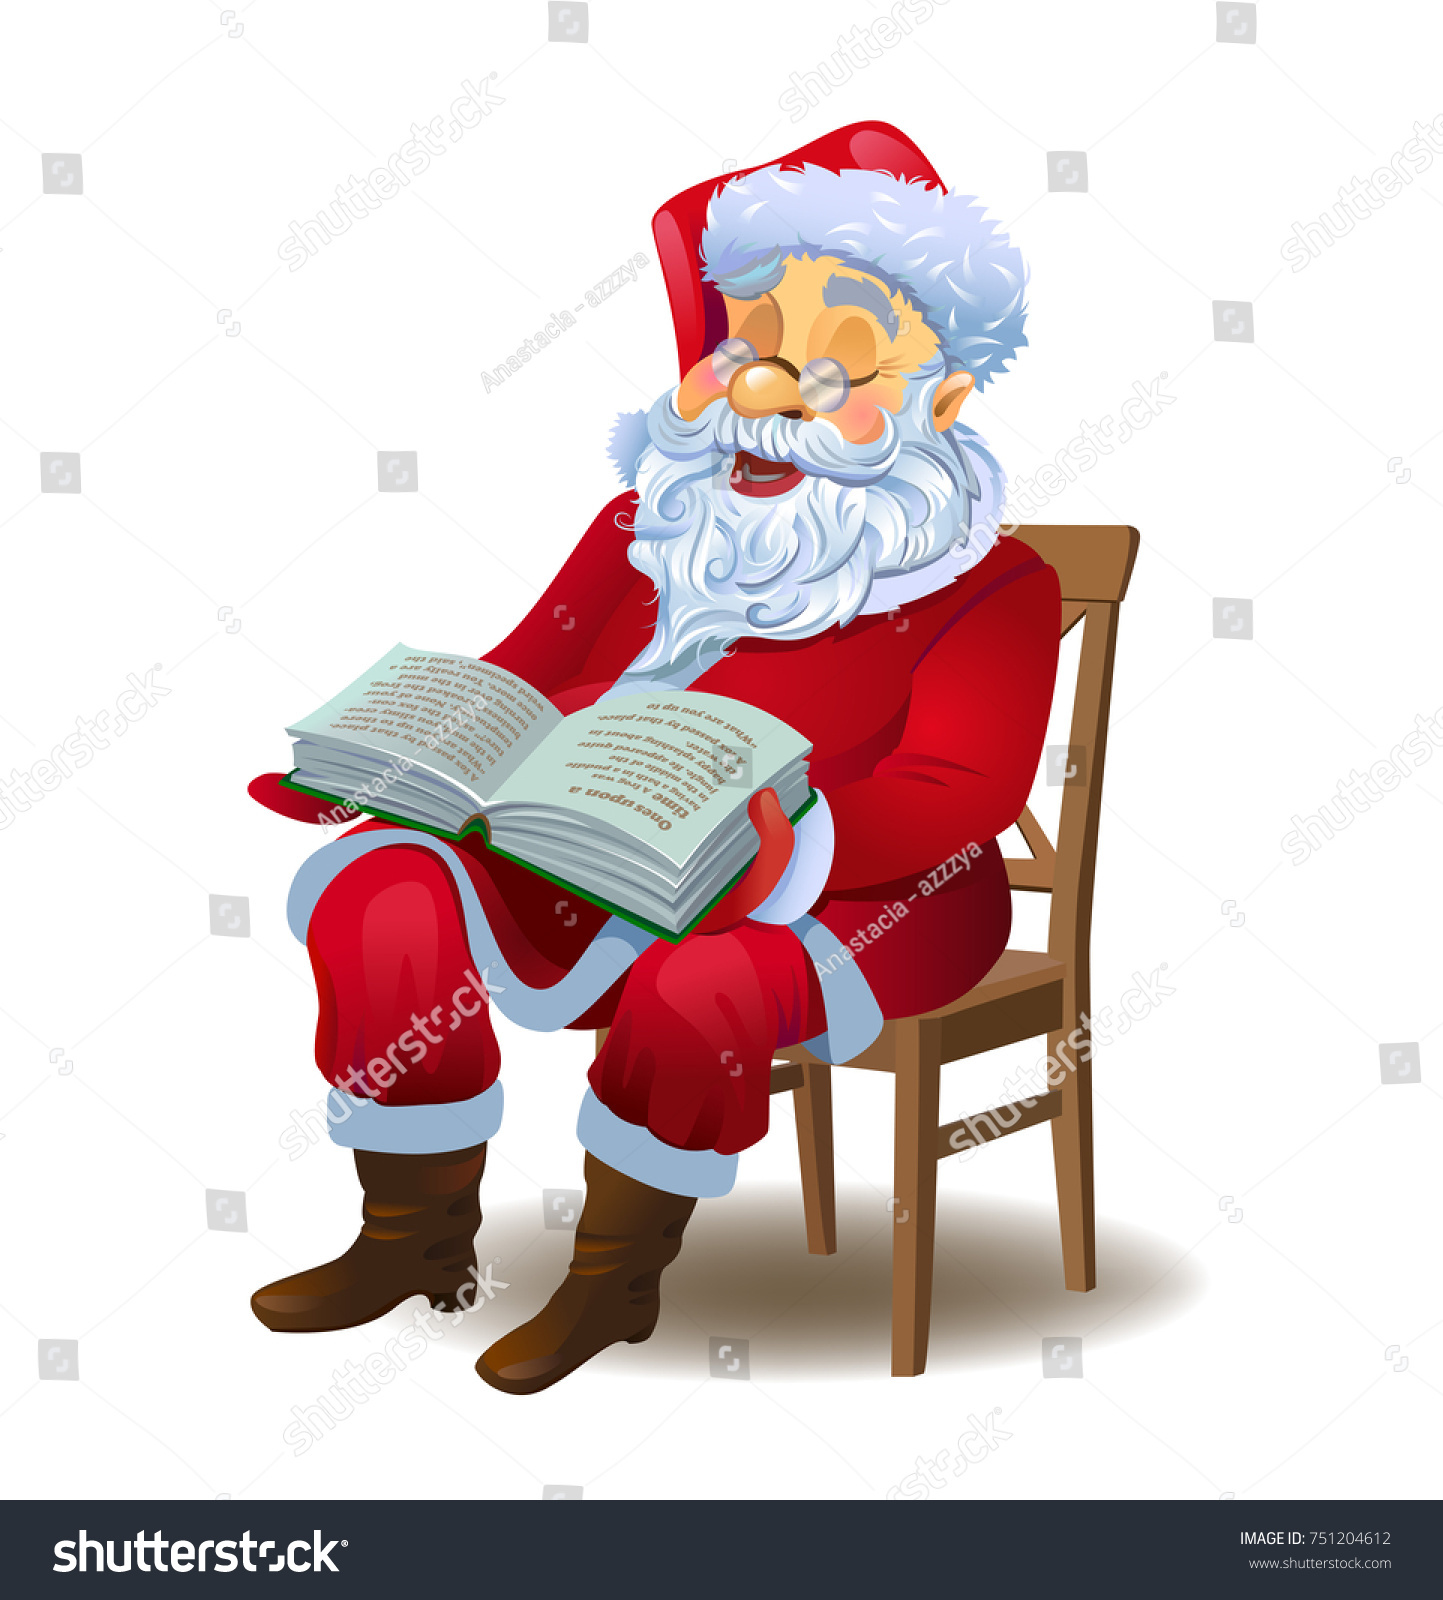 Santa Claus reading the book a vector illustration in traditional style